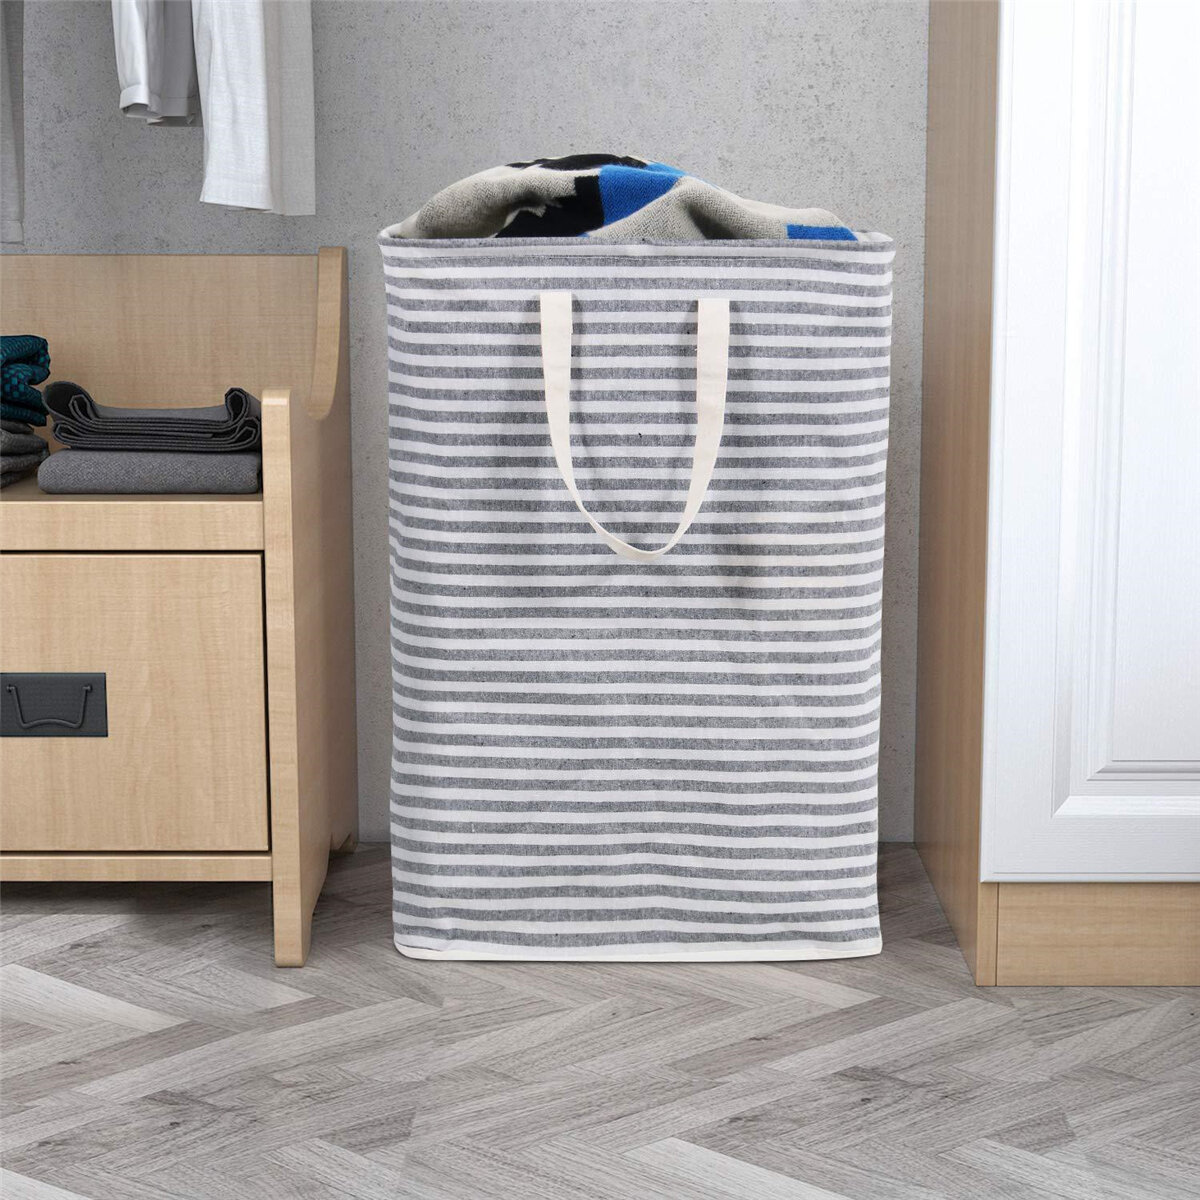 

Large Capacity Storage Box Folding Dirty Clothes Hamper Sundries Storage Moisture Proof Cotton Linen Widened Portable